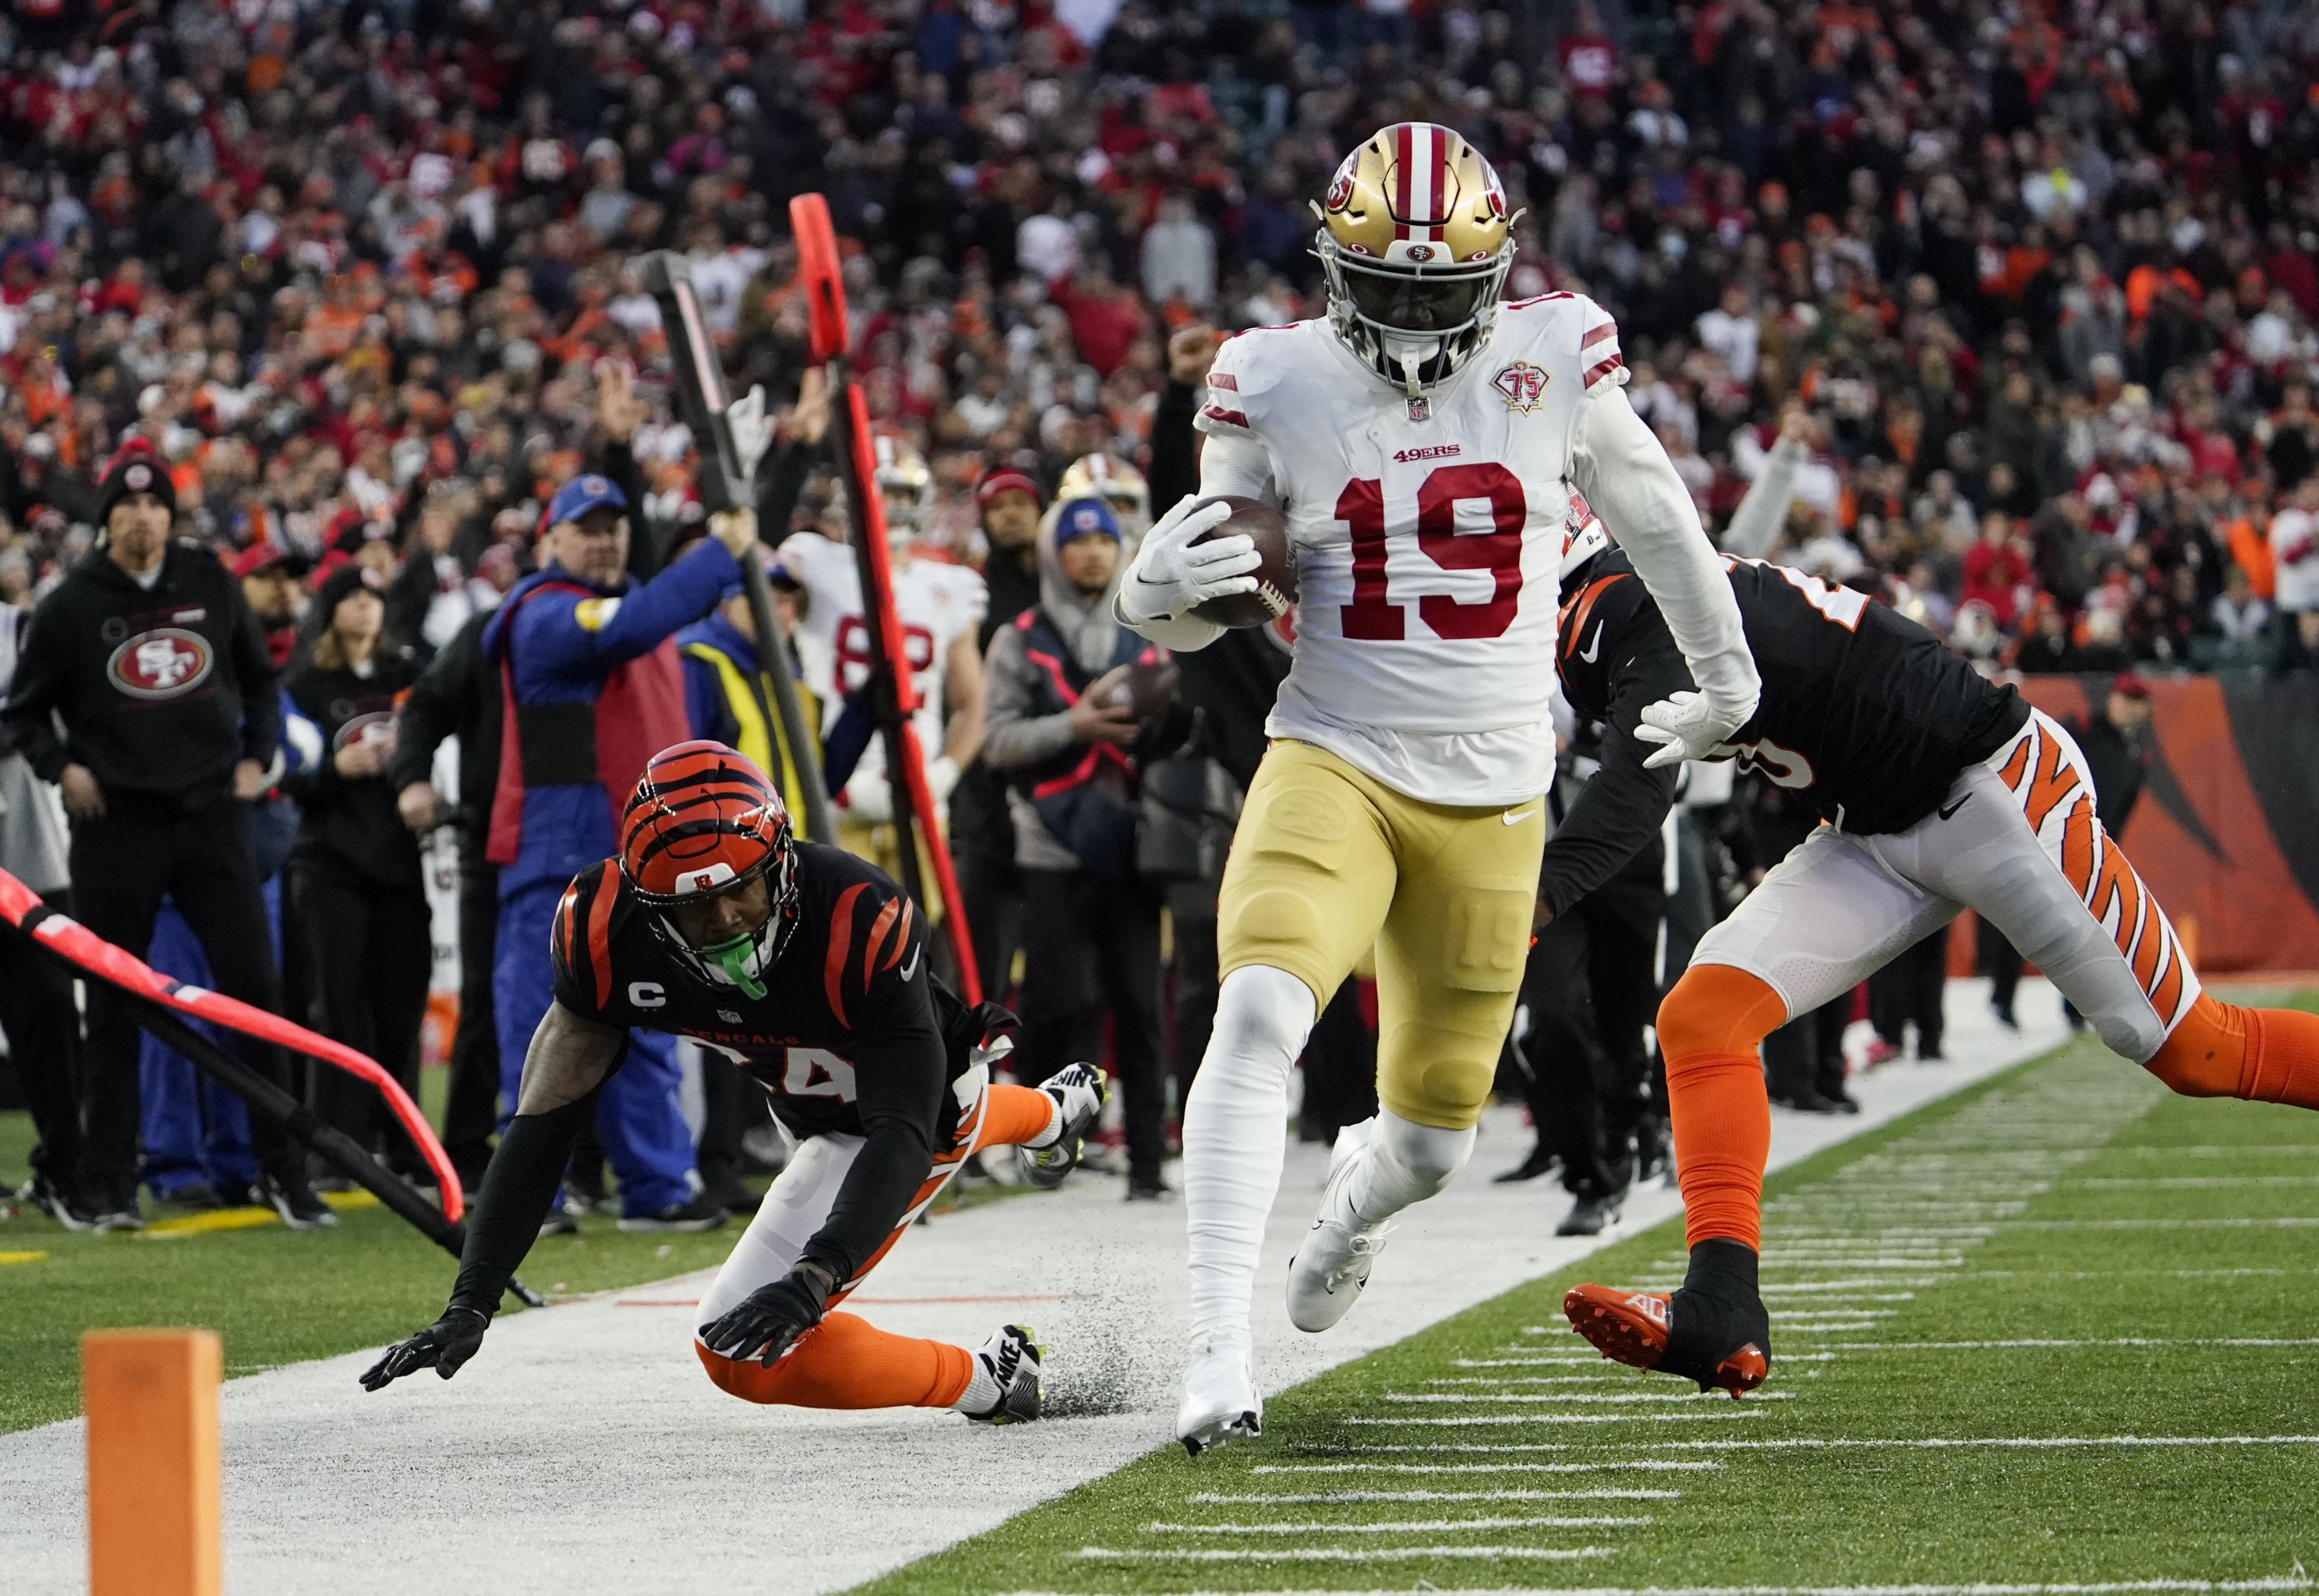 Key stats from the 49ers' 41-33 Week 1 win over the Lions